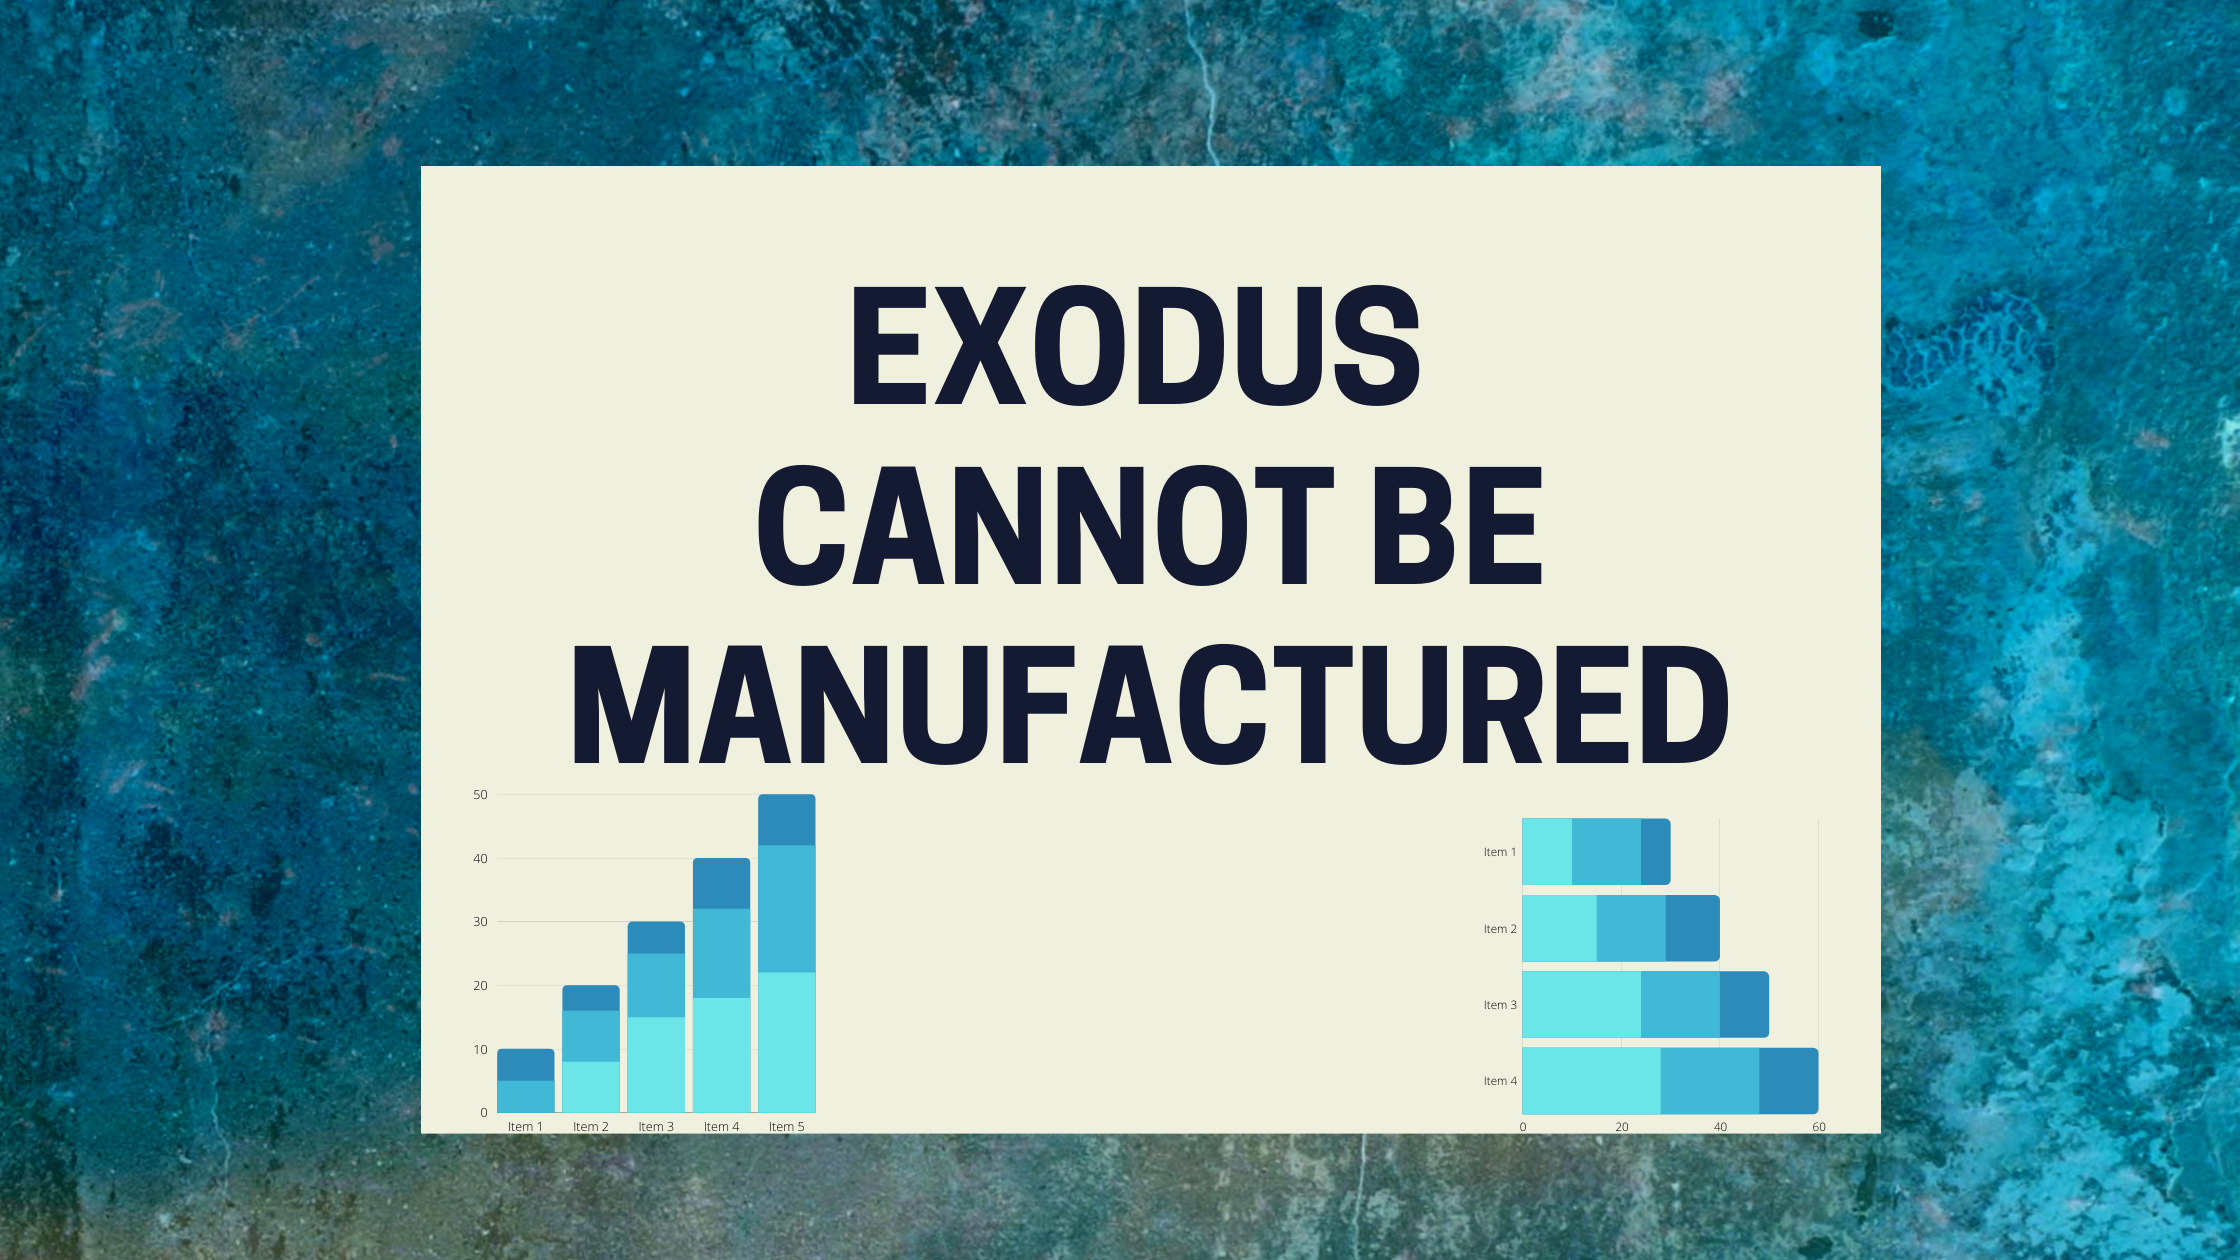 Exodus cannot be manufactured